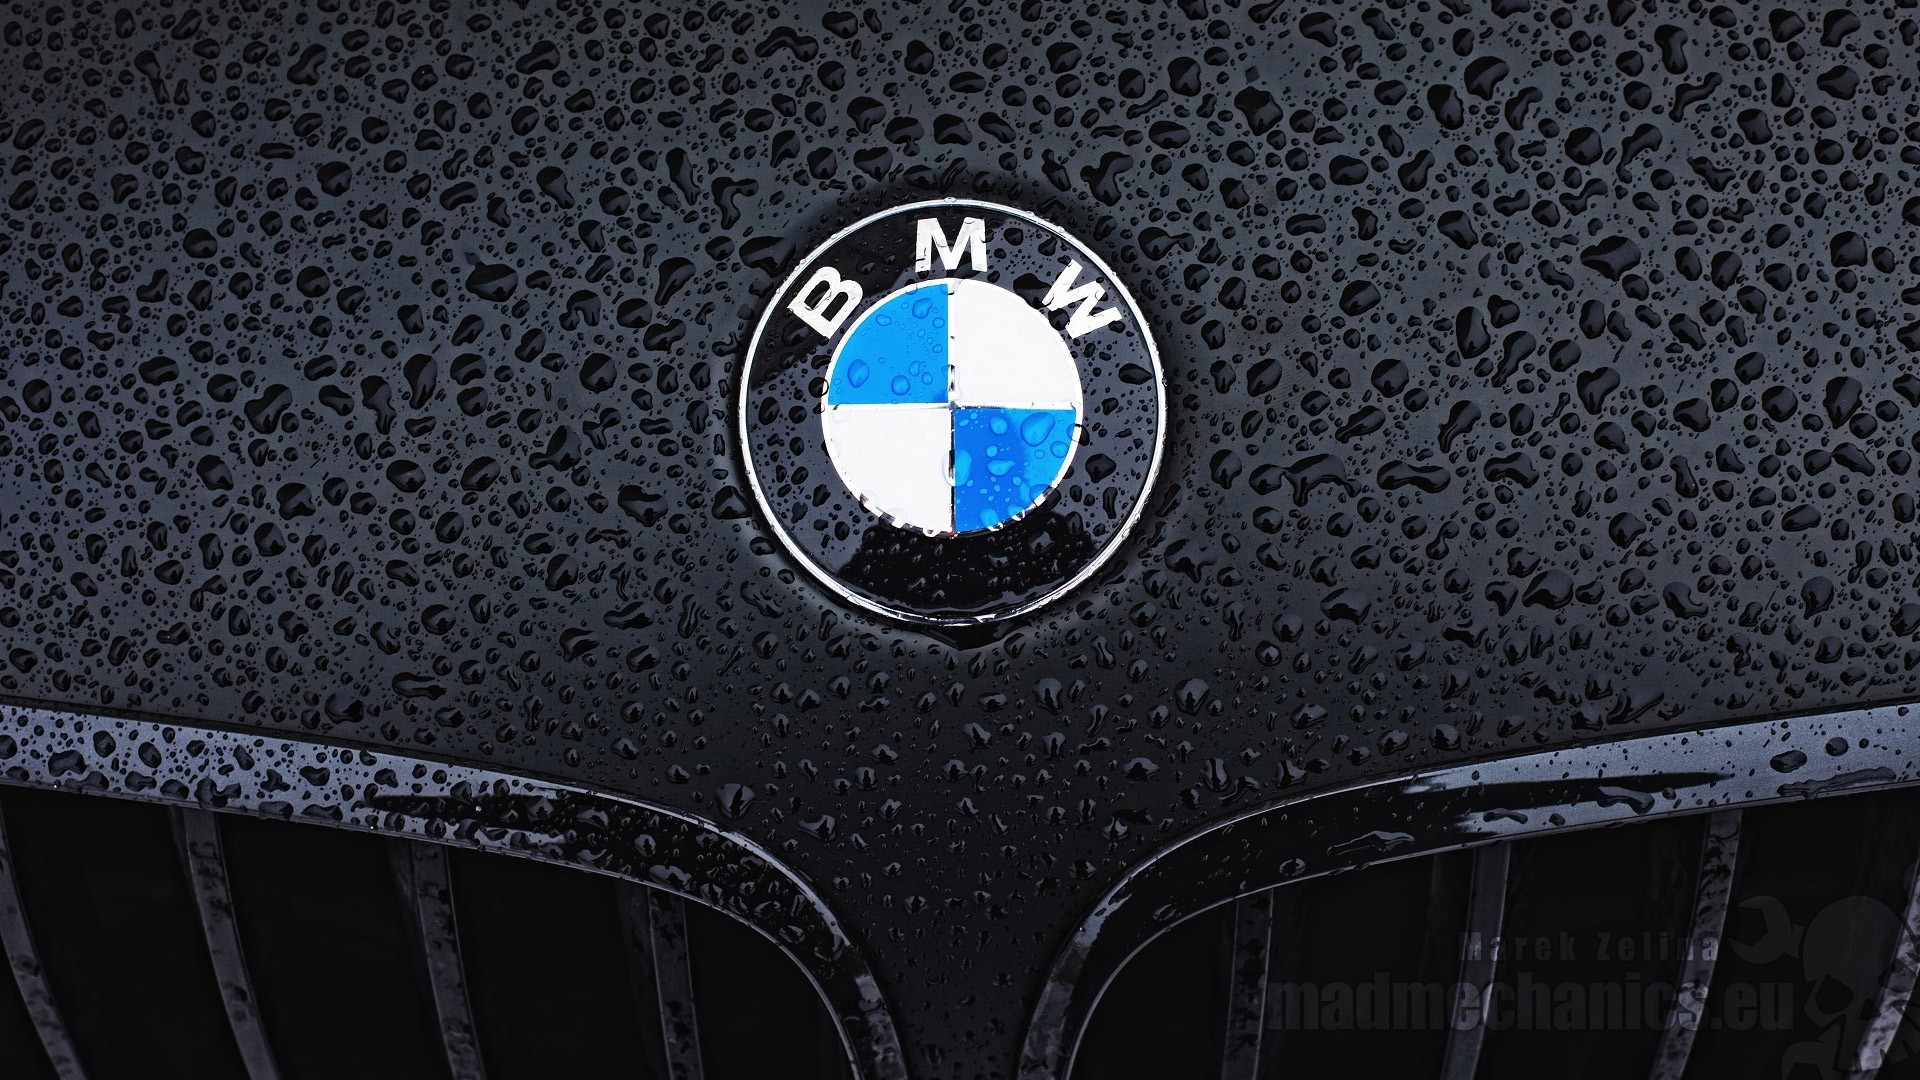 1920x1080 bmw logo wallpapers check out these 72 awesome bmw logo wallpapers for .